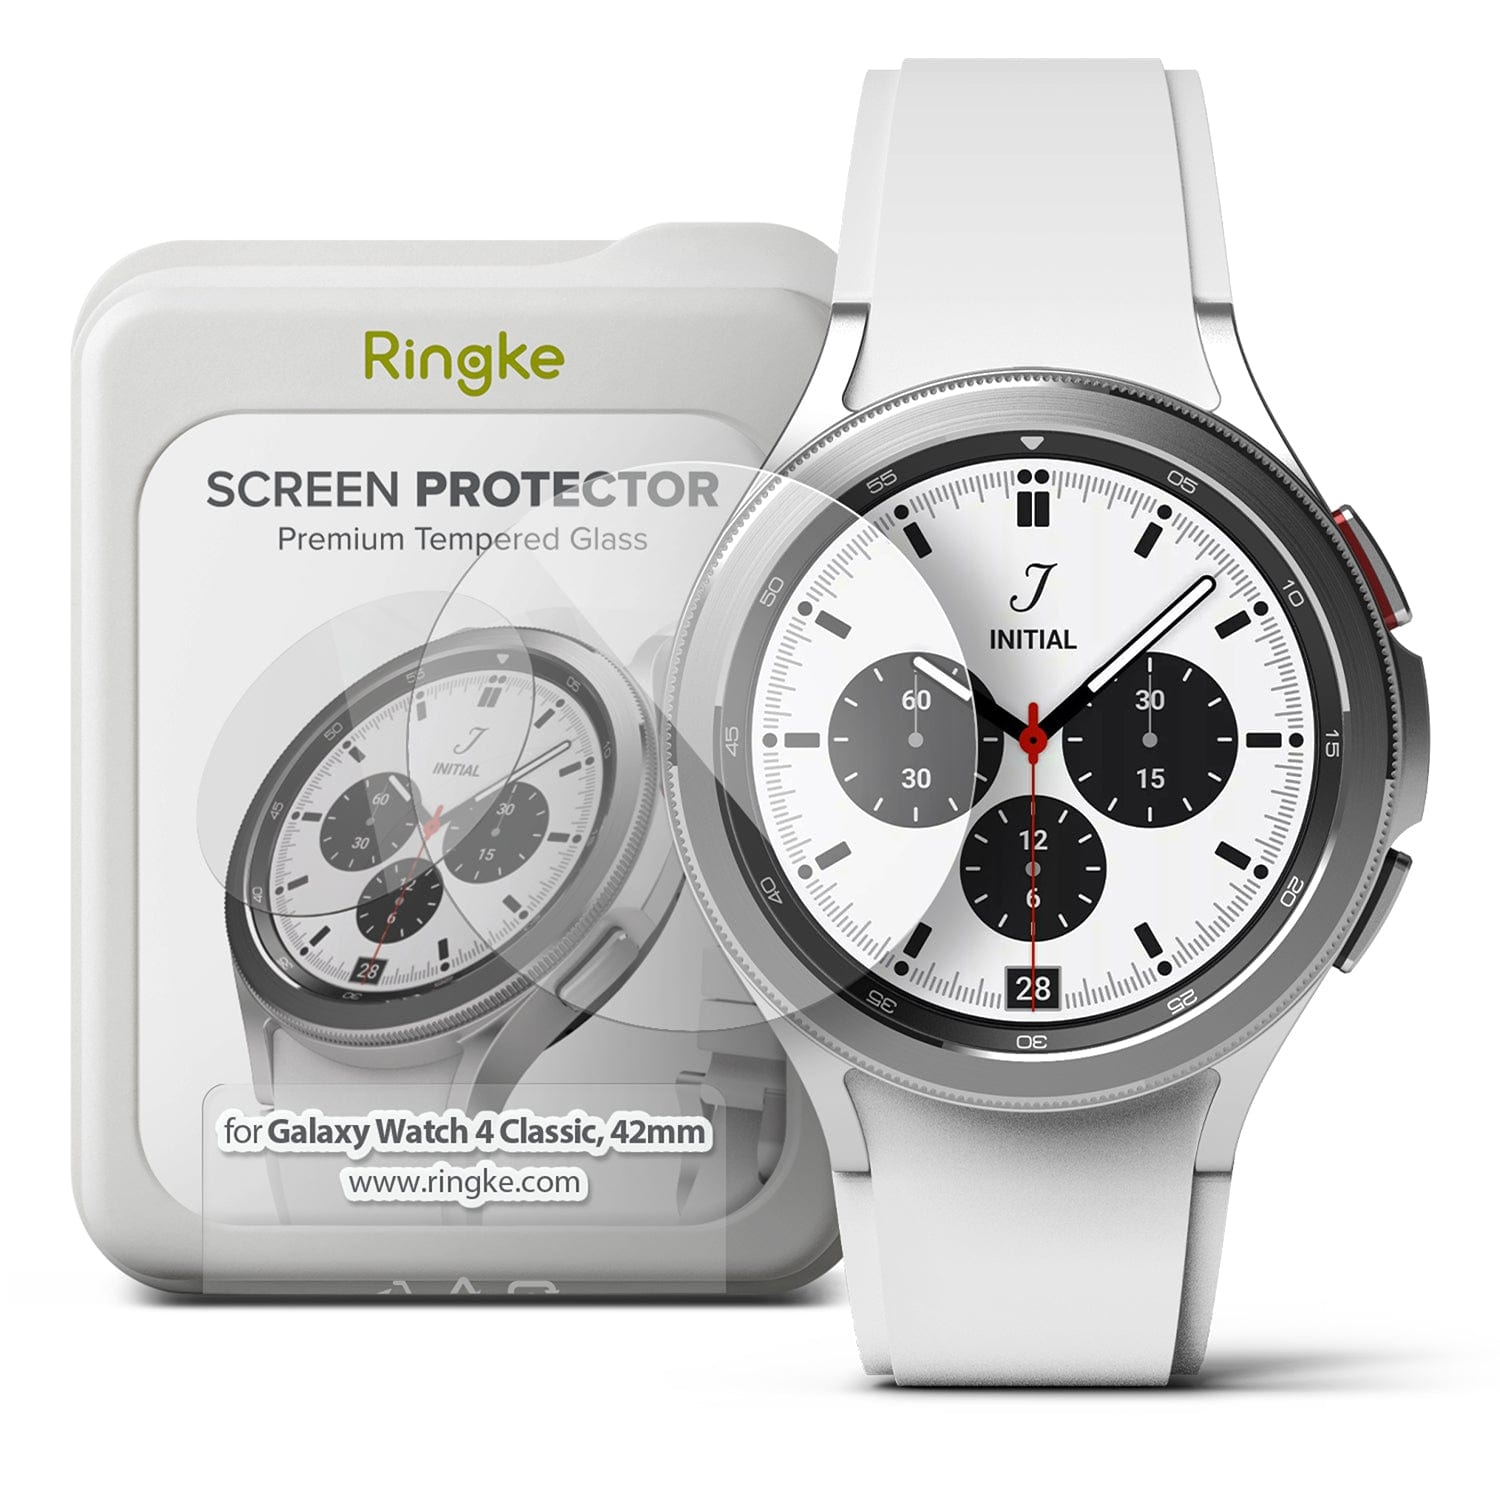 Secure your Galaxy Watch 4 Classic 42mm with the Ringke ID Glass Screen Protector for enhanced protection.